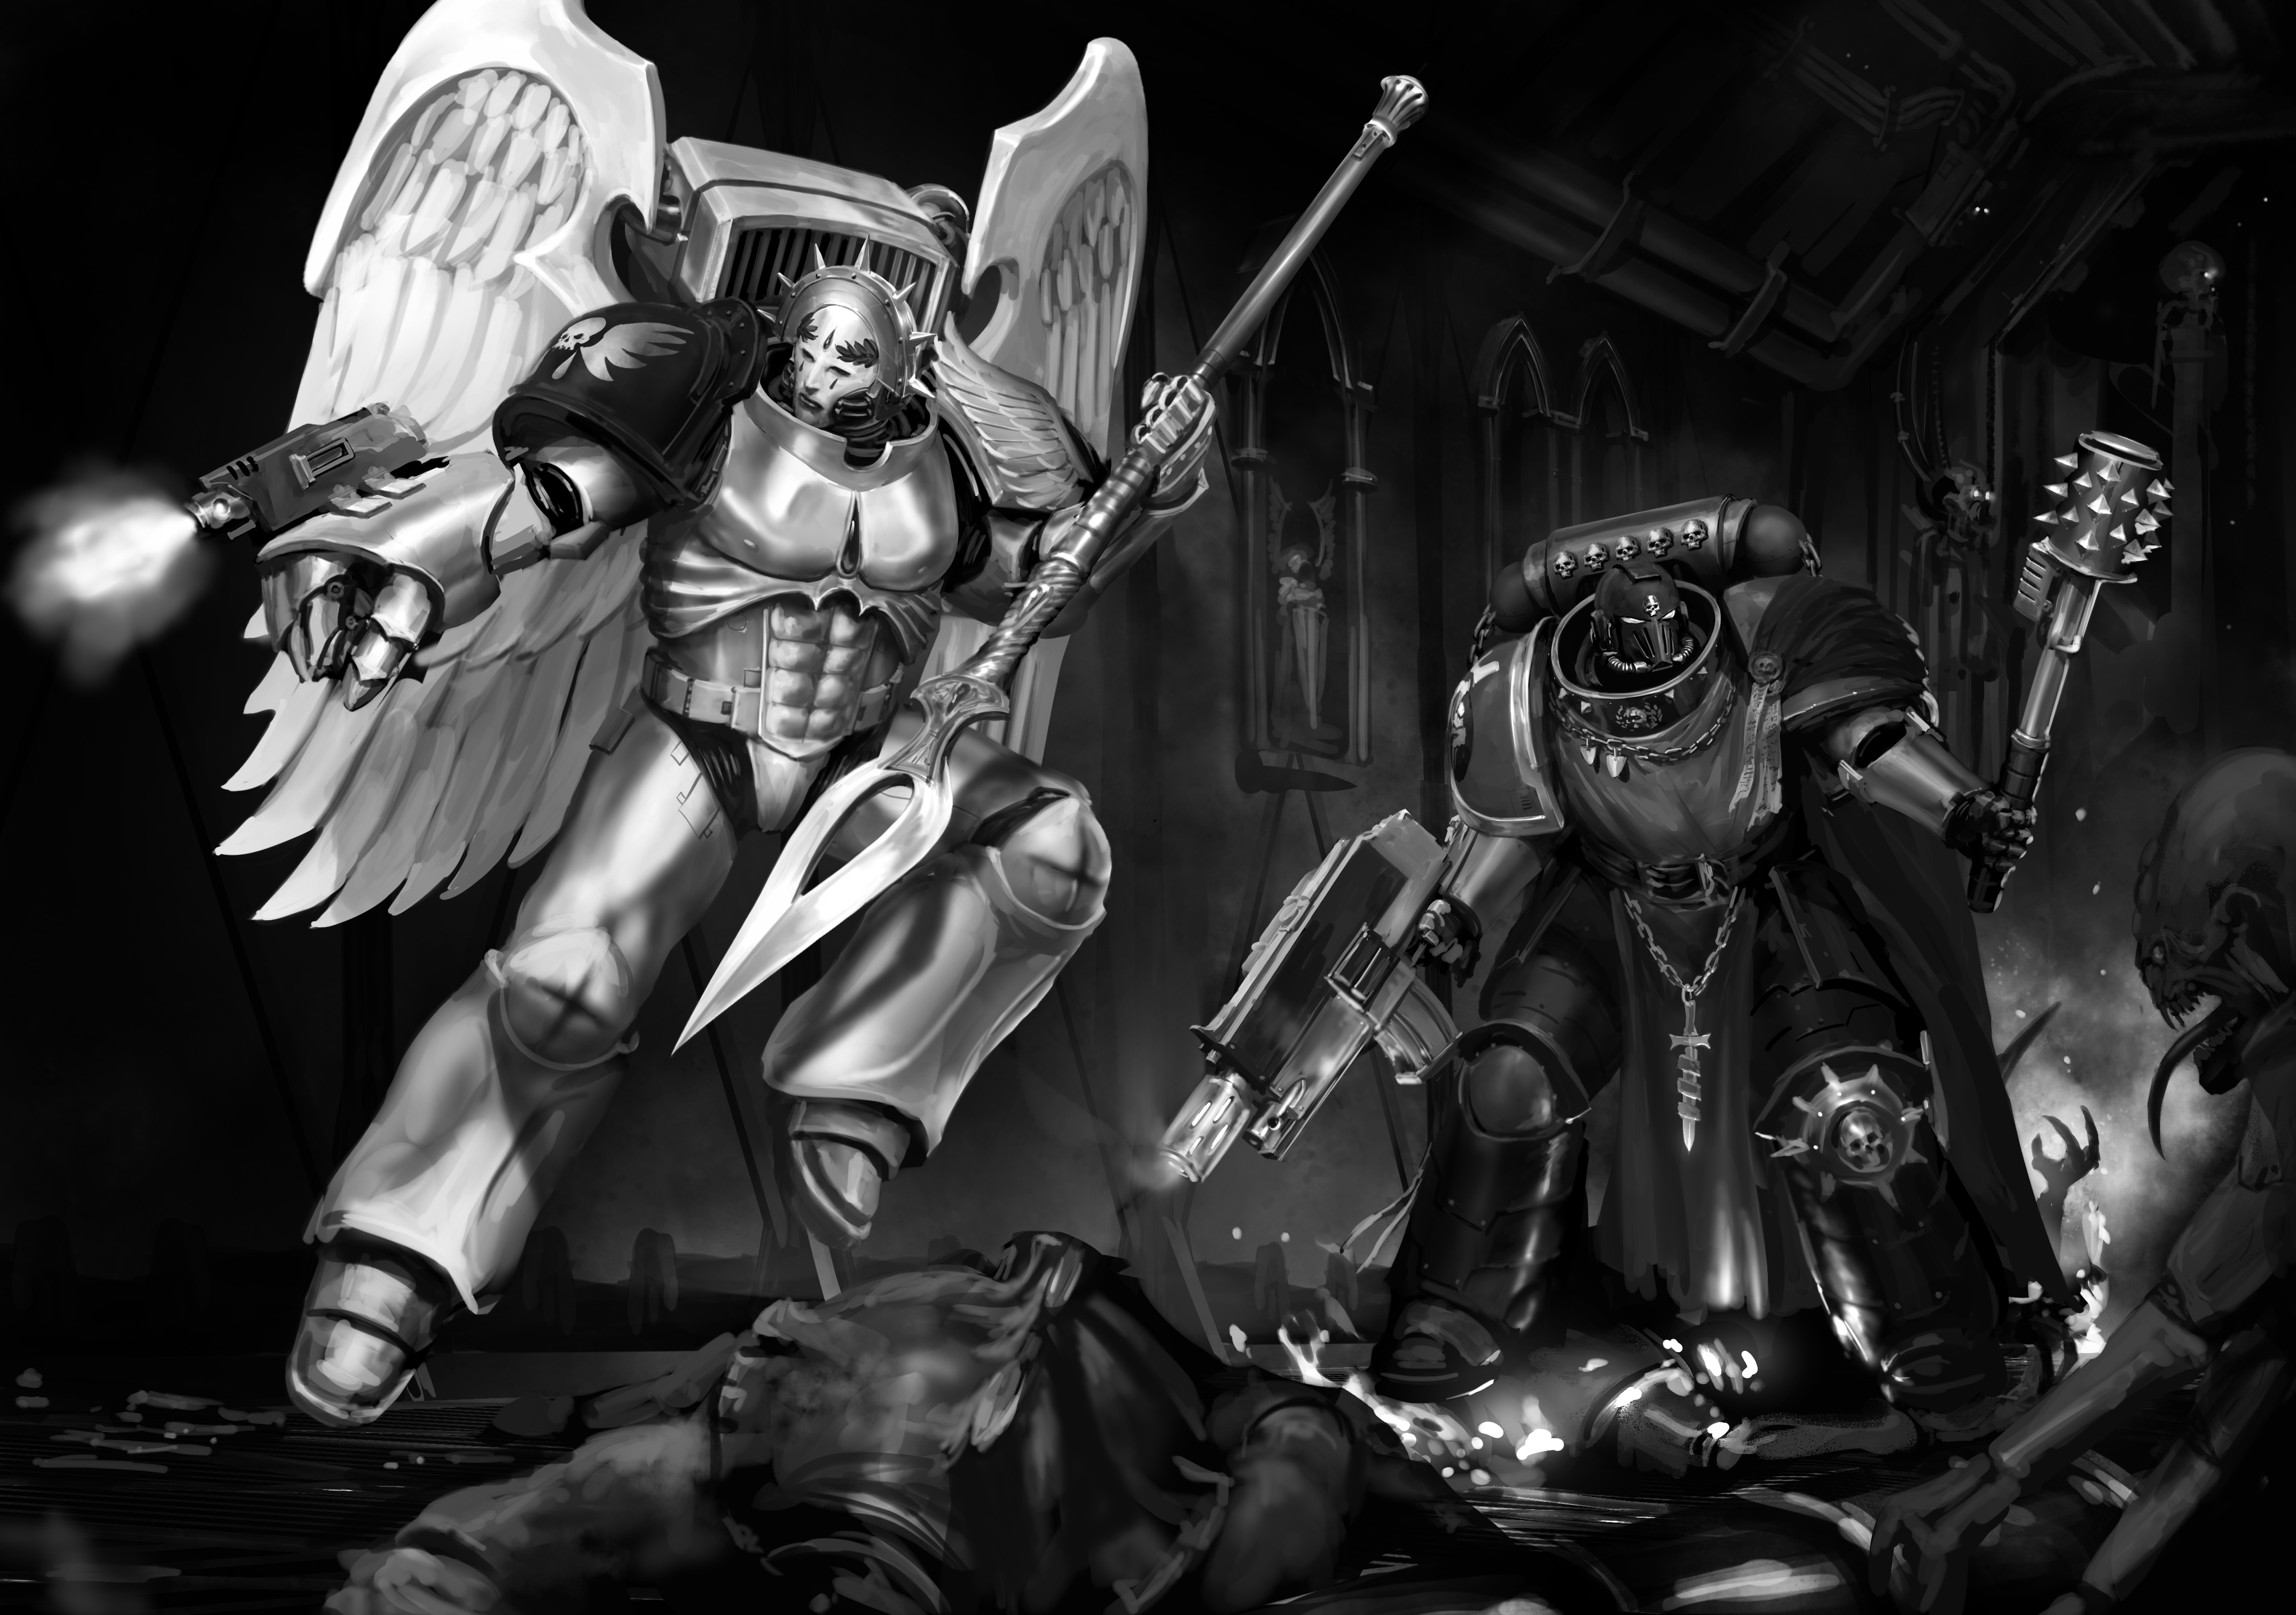 Meet the Space Marines Who Will Be Crushing Genestealer Cultists in Angels  of Death - Warhammer Community